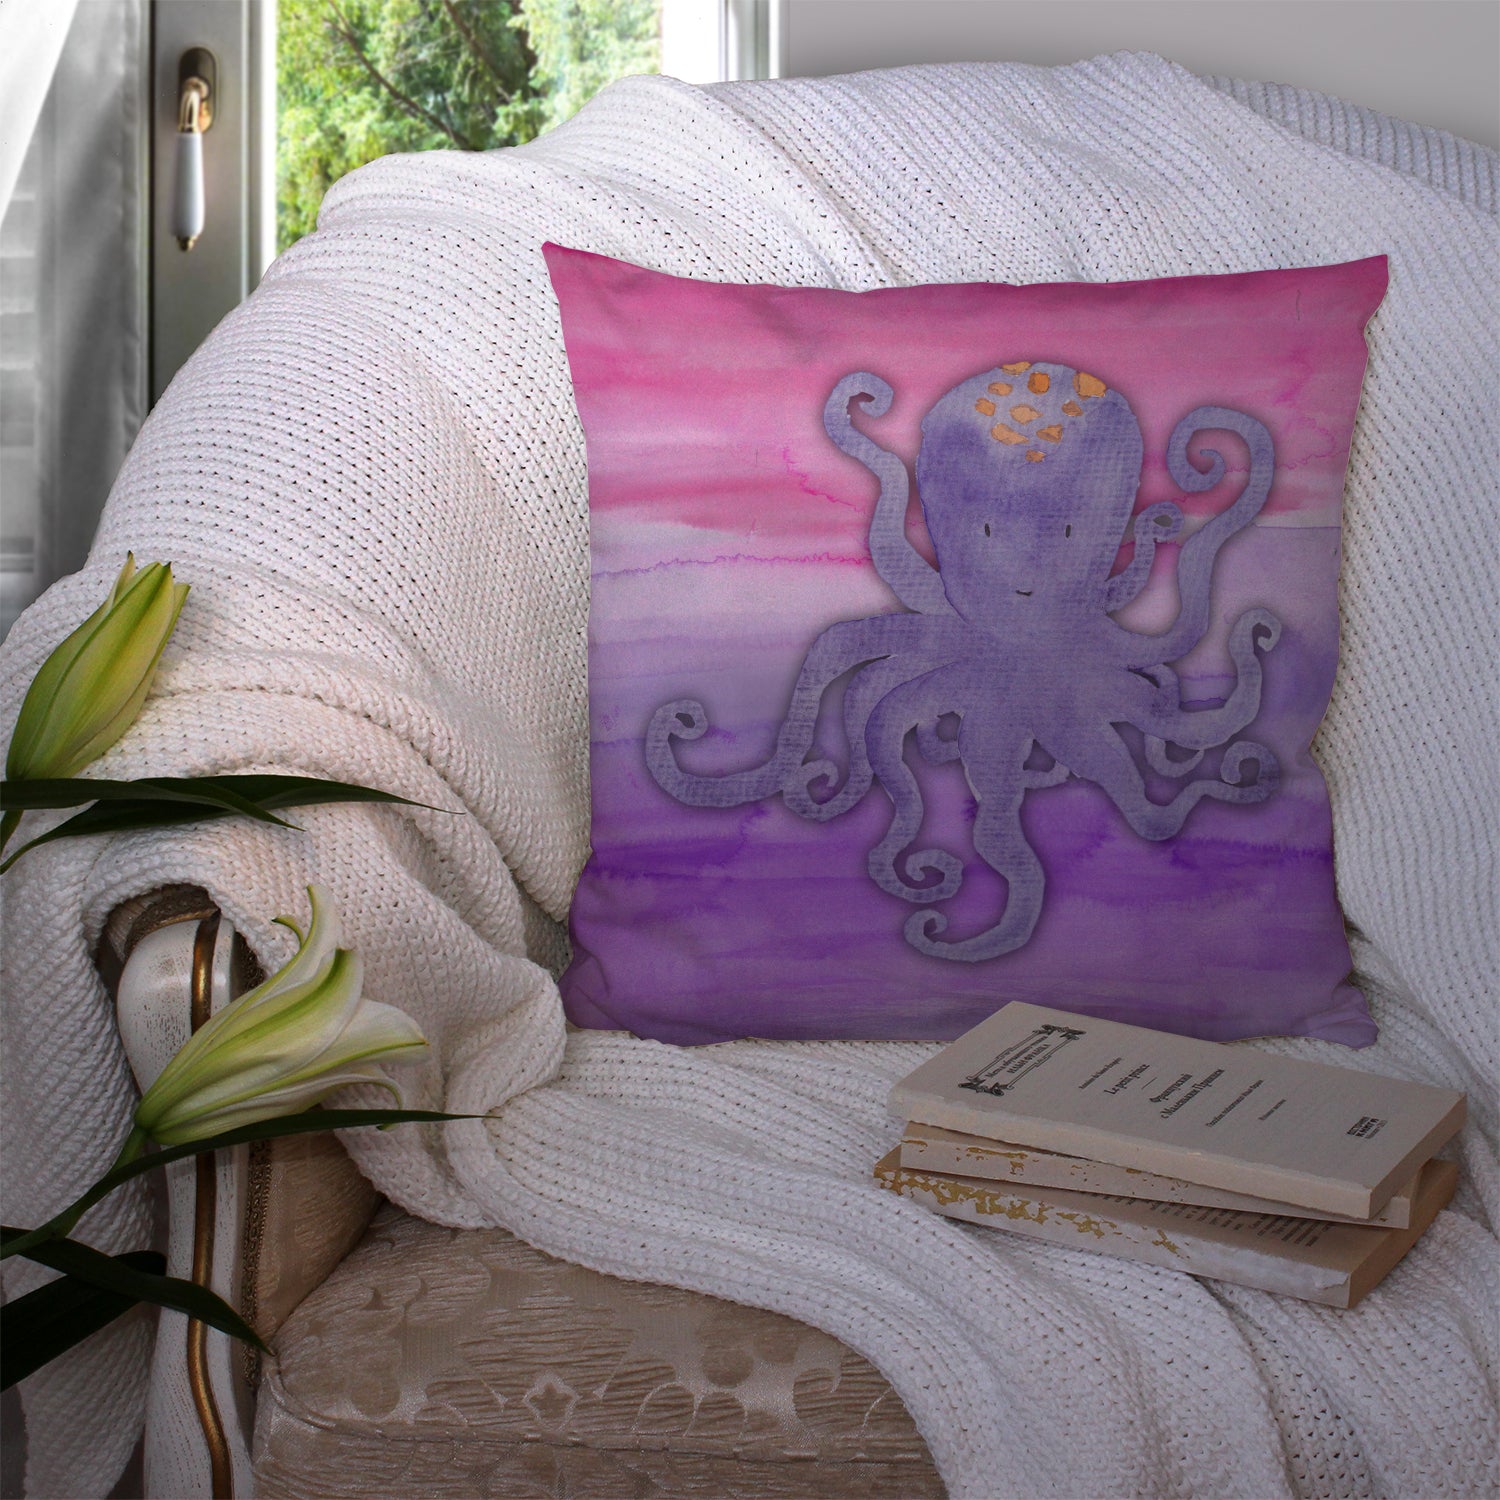 Octopus Watercolor Fabric Decorative Pillow BB7424PW1414 - the-store.com